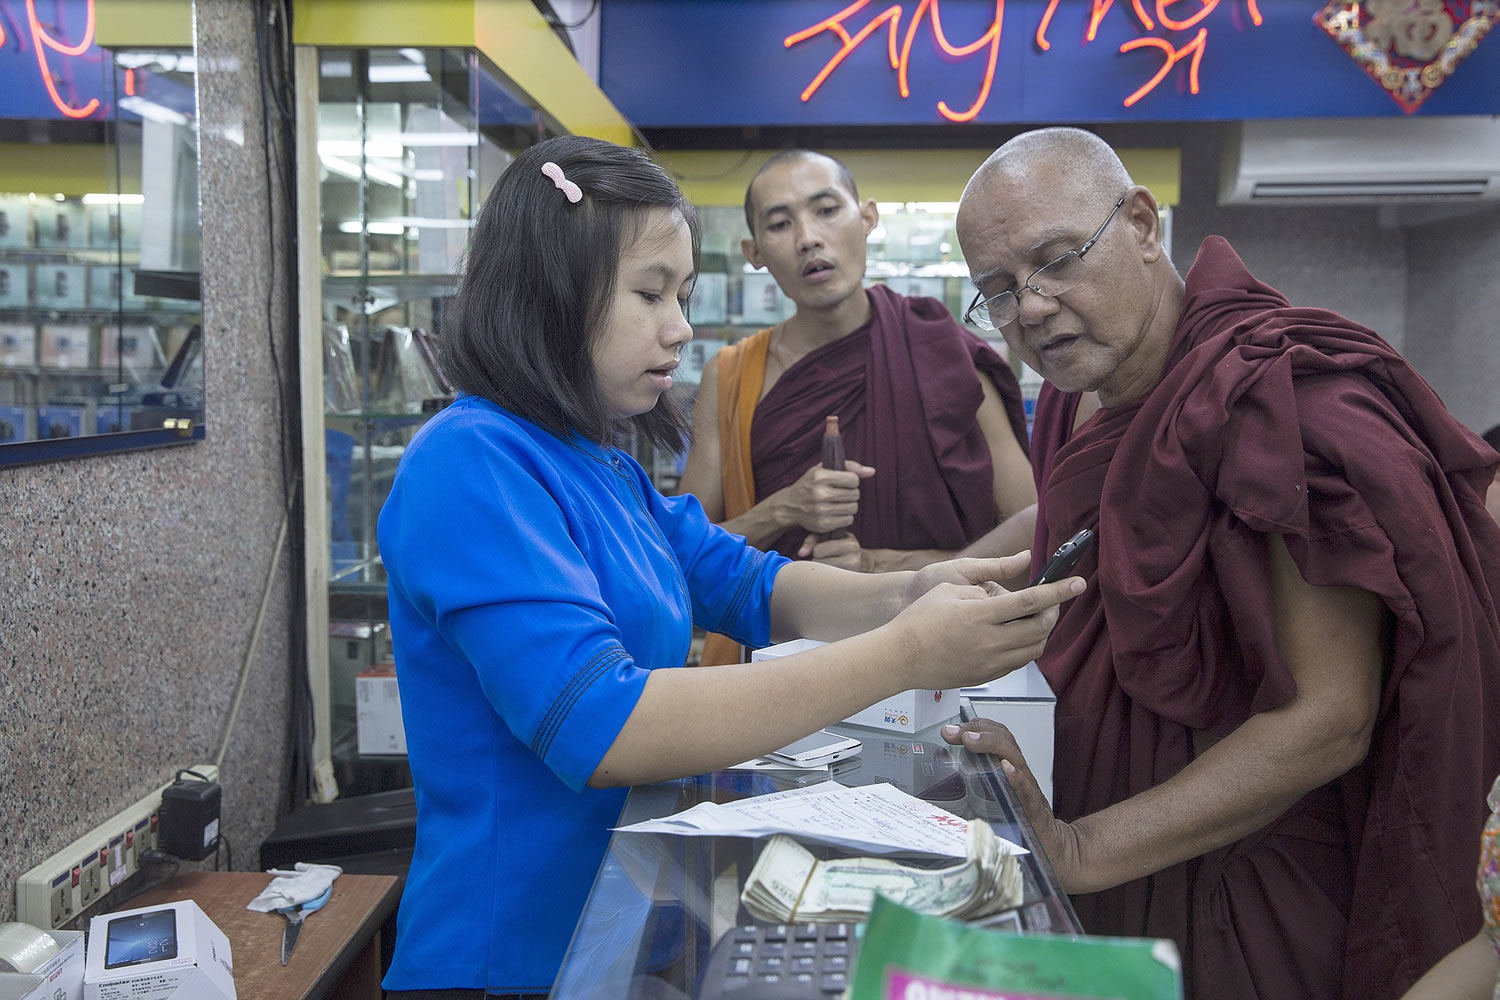 Until recently, few people in once-isolated Myanmar, also known as Burma, had mobile telephones. Here, Buddhist monks receive instruction on new services after buying a phone on Nov.